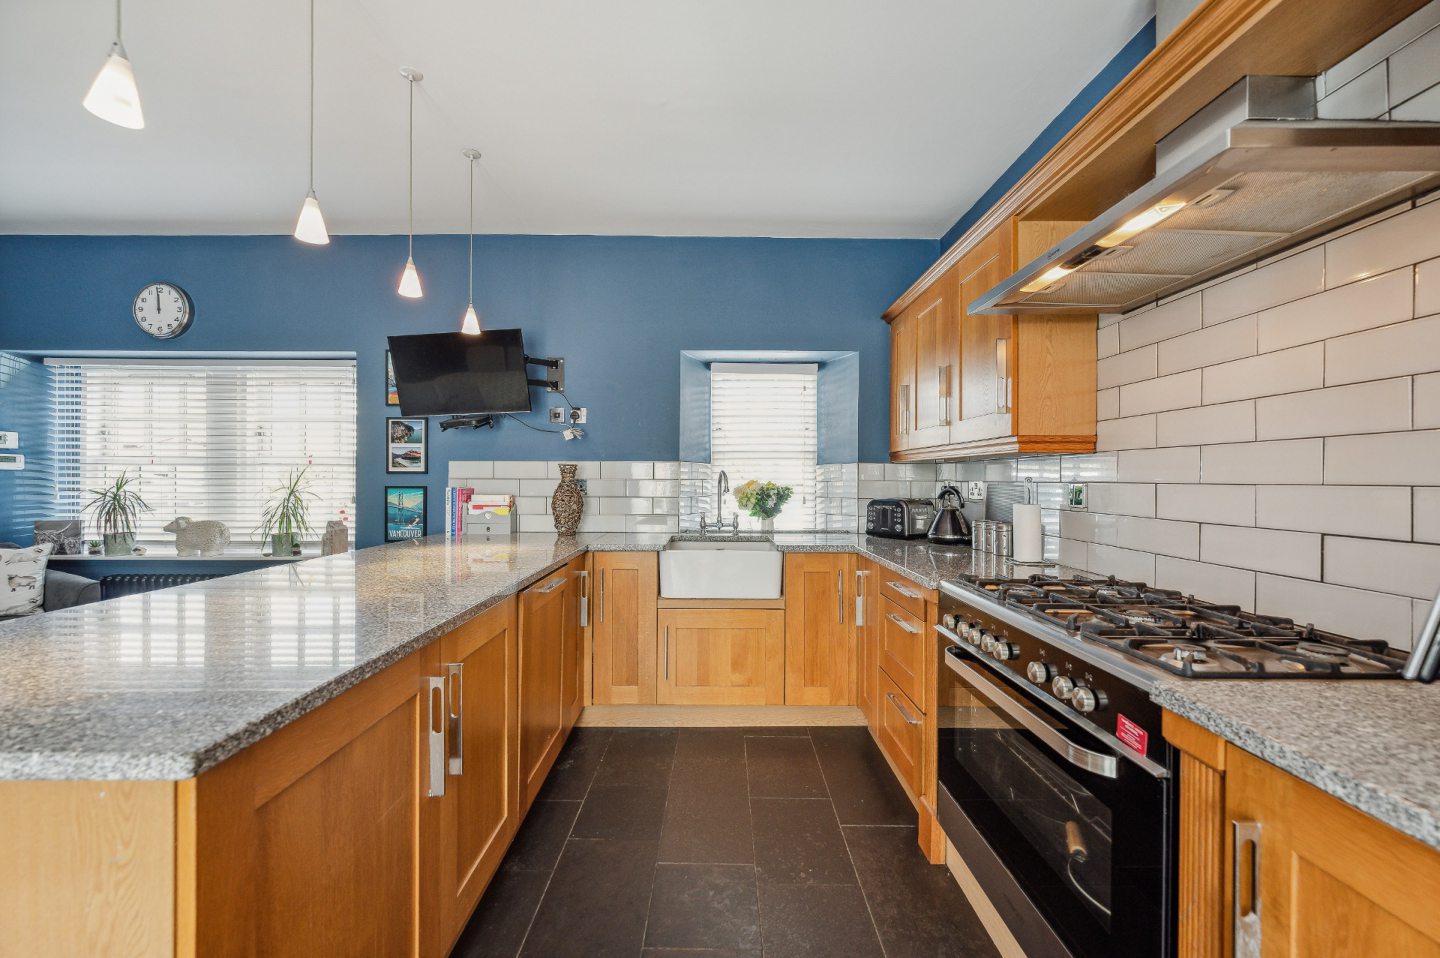 The kitchen has luxury touches such as an integrated cooker and Belfast sink